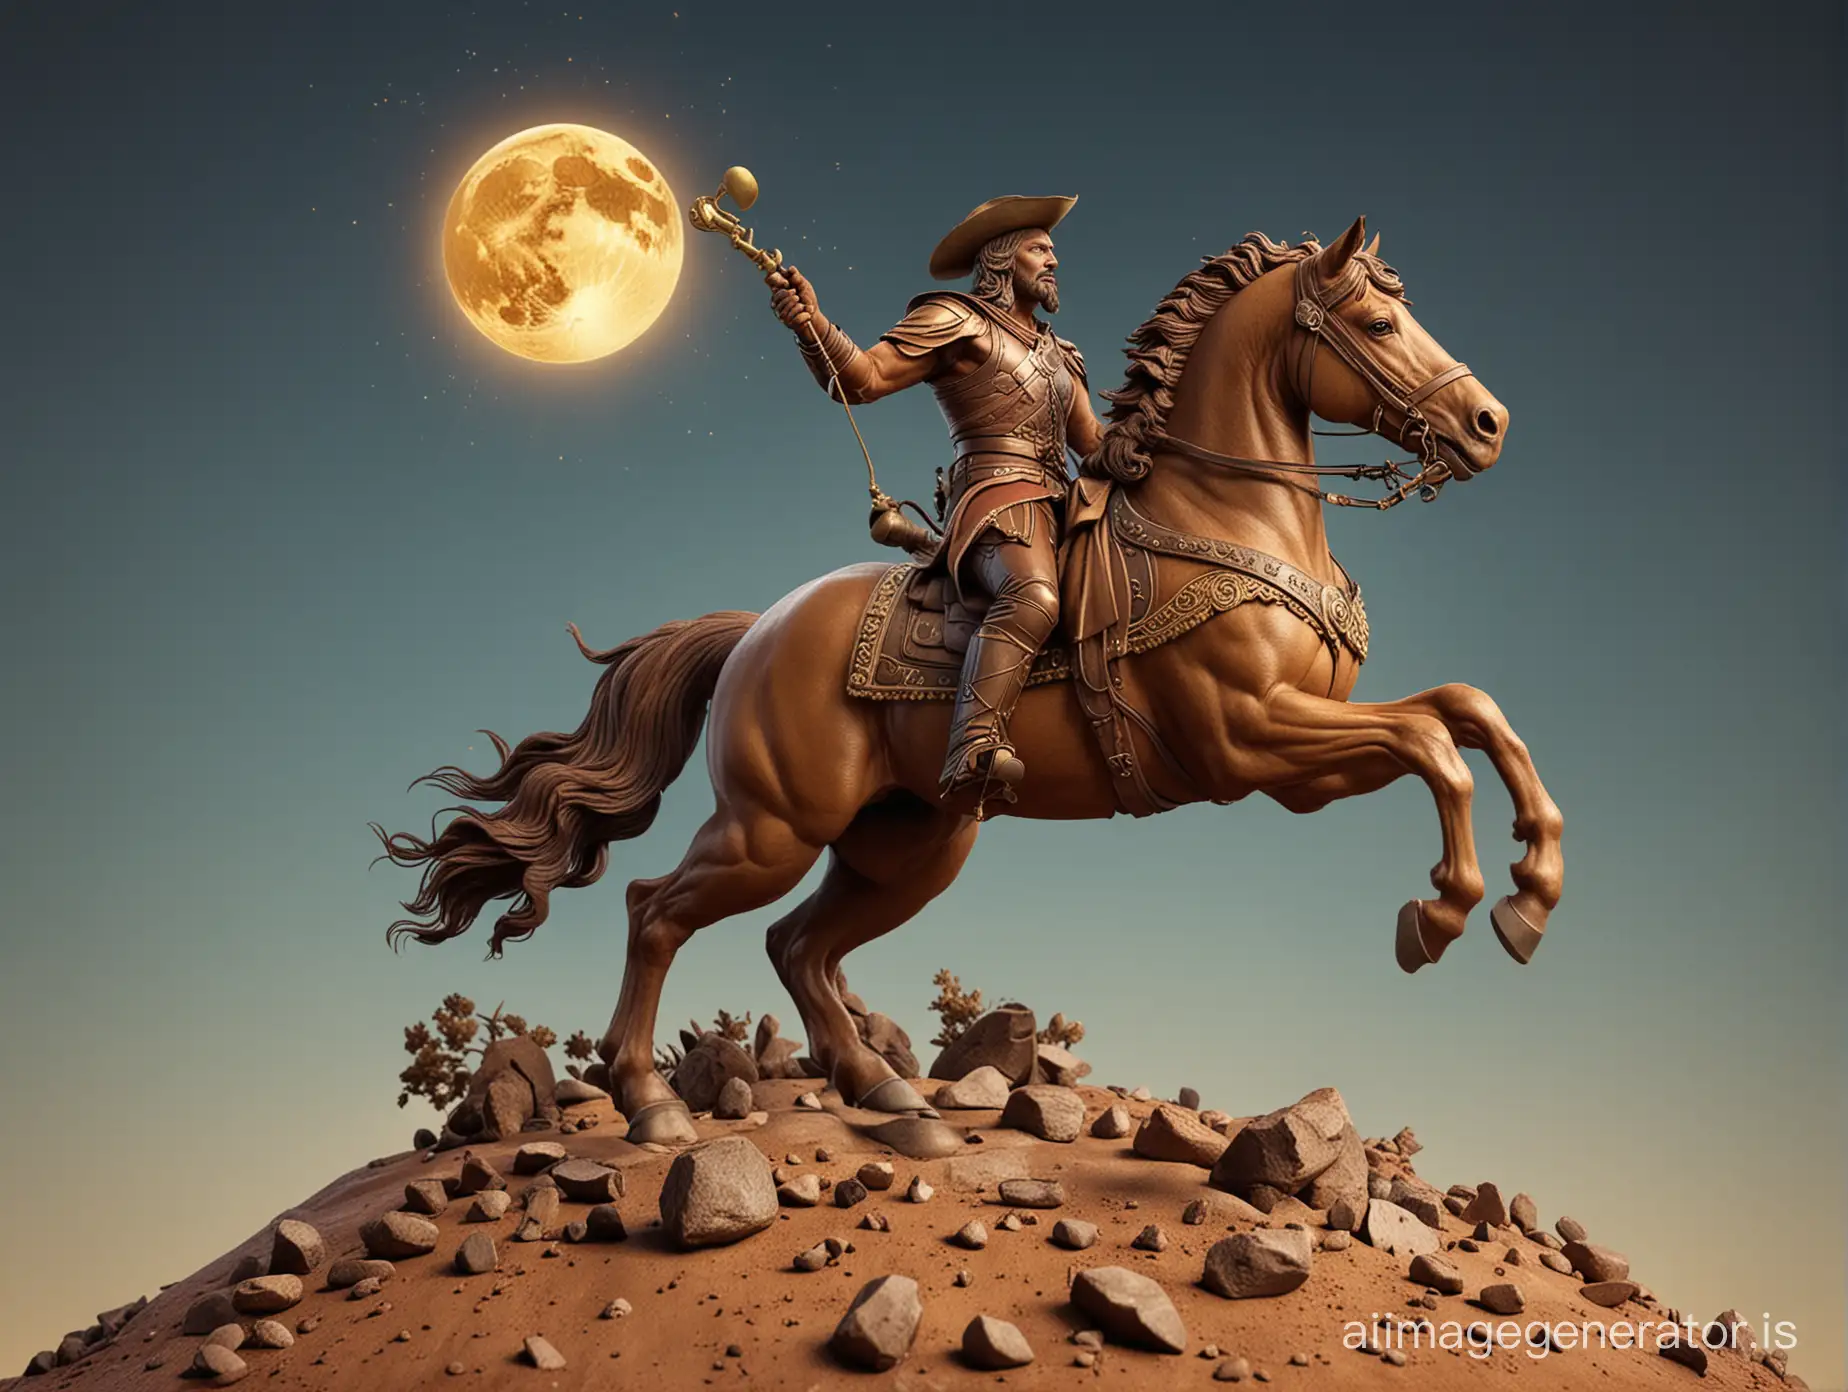 Planet Pluto, on a horse, Craftsmanship, 3d, realisting, mythology, Jack of Spades card, Craftsmanship, 3d, realisting, mythology, Planet Mars, The Sun, riches, cornucopia, Throne, golden riches, Astrology, cardology, Bacchus, the god of wine and revelry, embodies the joyous celebration of life's pleasures and the ecstatic dance of destiny.